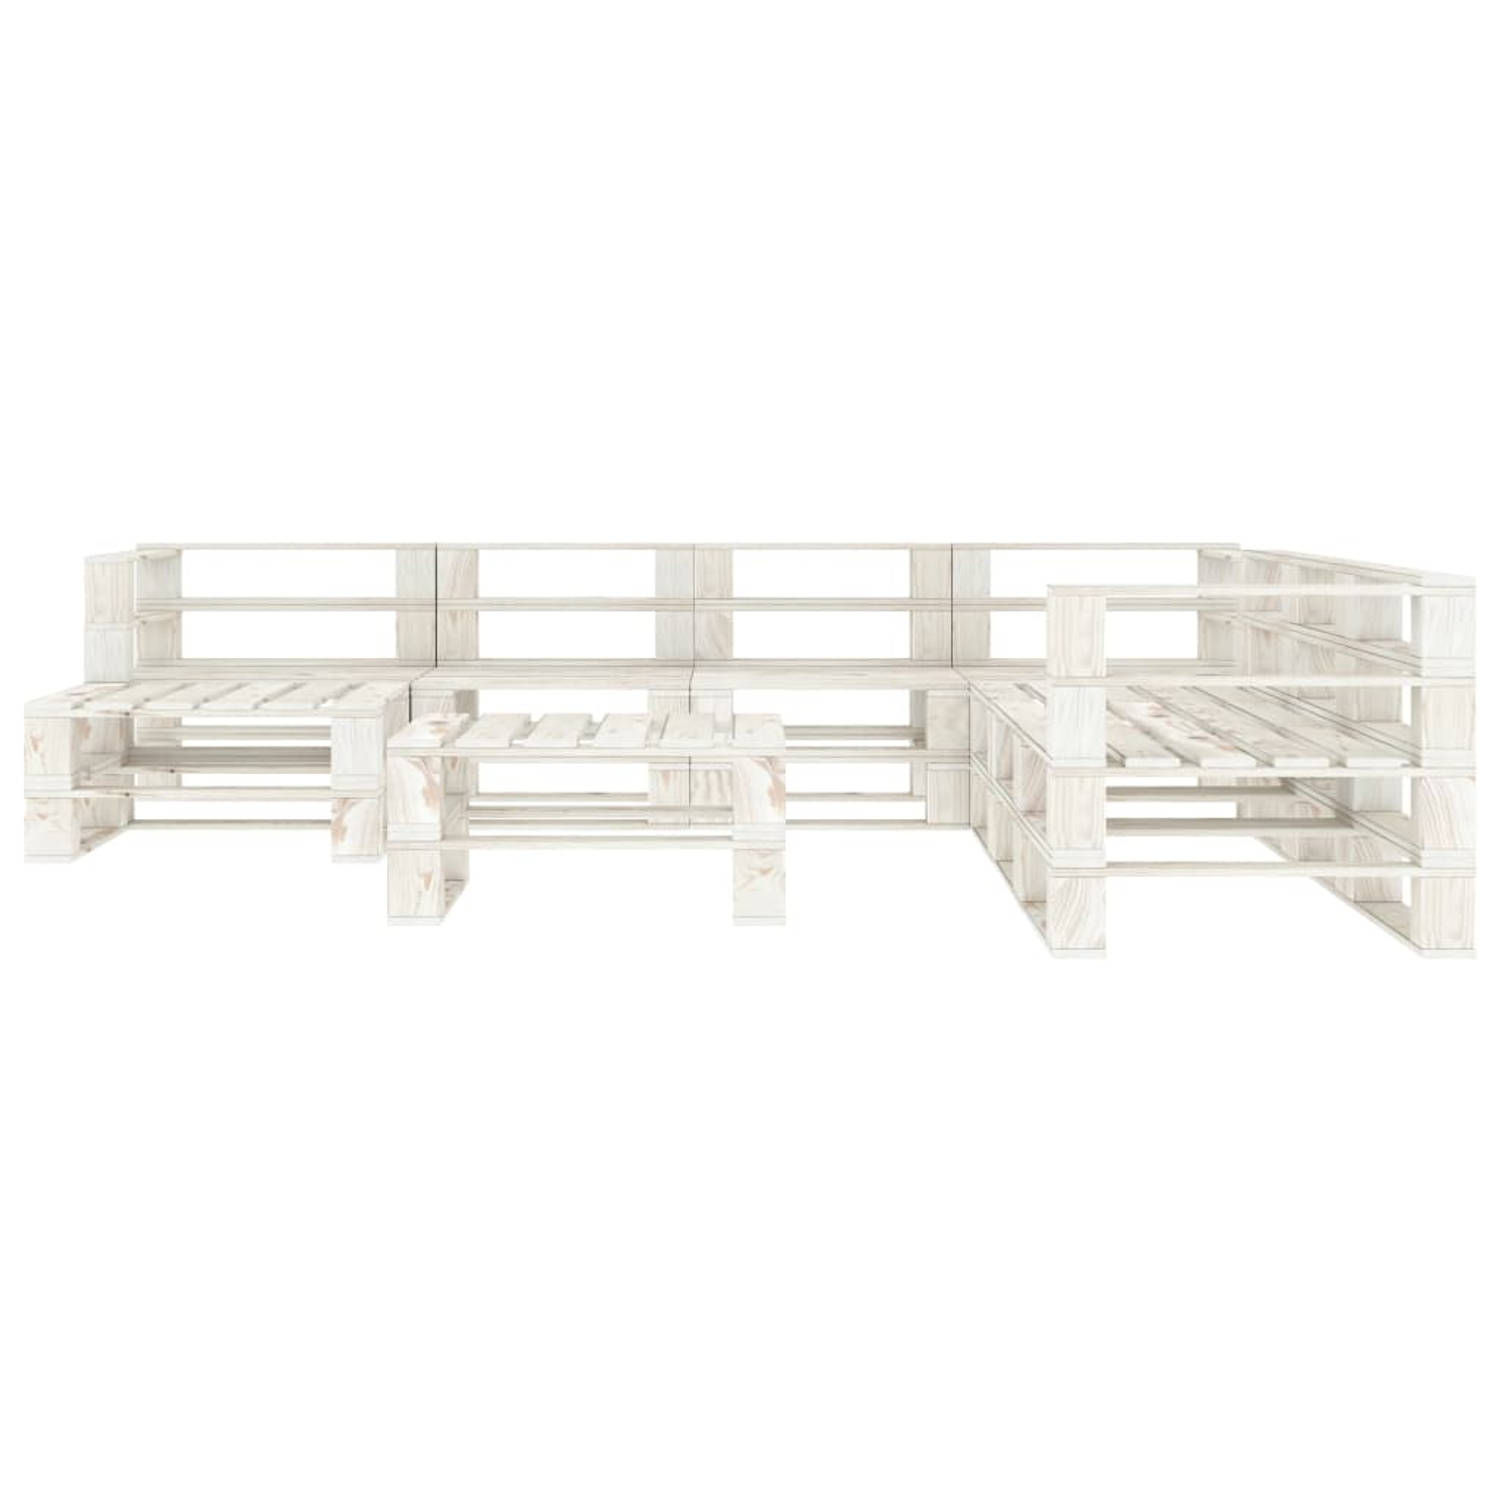 The Living Store 9-delige Loungeset pallet hout wit - Tuinset